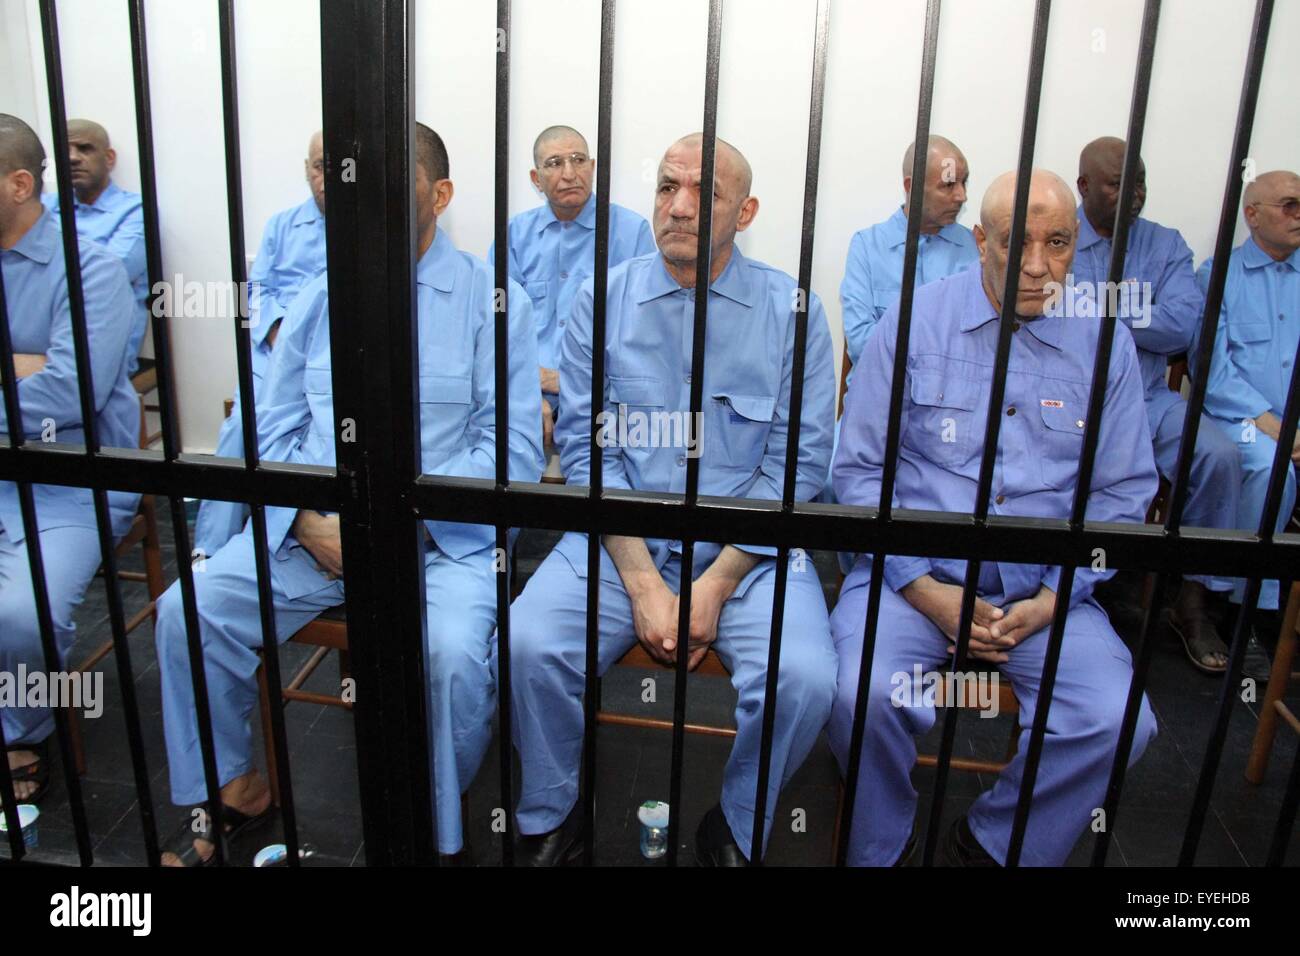 (150728) -- TRIPOLI, July 28, 2015 (Xinhua) -- Gaddafi-era officials wait for their trial in a prison cage in Tripoli, Libya, on July 28, 2015. A Libyan court on Tuesday sentenced Saif al-Islam Gaddafi, son of the former leader Muammar Gaddafi, to death, according to local judicial resources. The Tripoli-based court also ruled on eight other senior figures of the former government, including the former security chief, Abdullah al-Senussi. (Xinhua/Hamza Turkia) (djj) Stock Photo